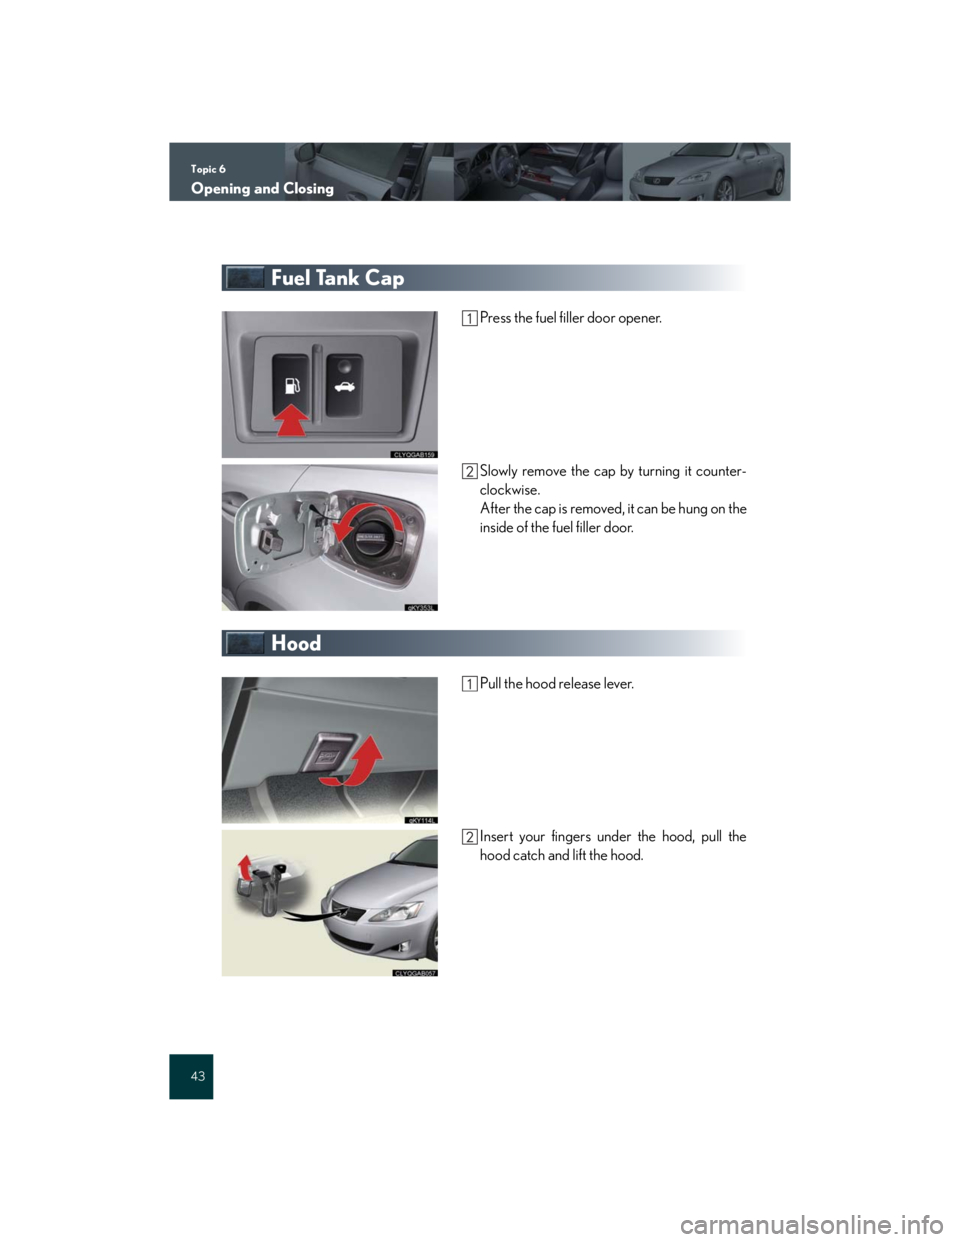 Lexus IS250 2007  Air Conditioning / LEXUS 2007 IS350/250 QUICK REFERENCE MANUAL Topic 6
Opening and Closing
43
Fuel Tank Cap
Press the fuel filler door opener.
Slowly remove the cap by turning it counter-
clockwise.
After the cap is removed, it can be hung on the
inside of the fu